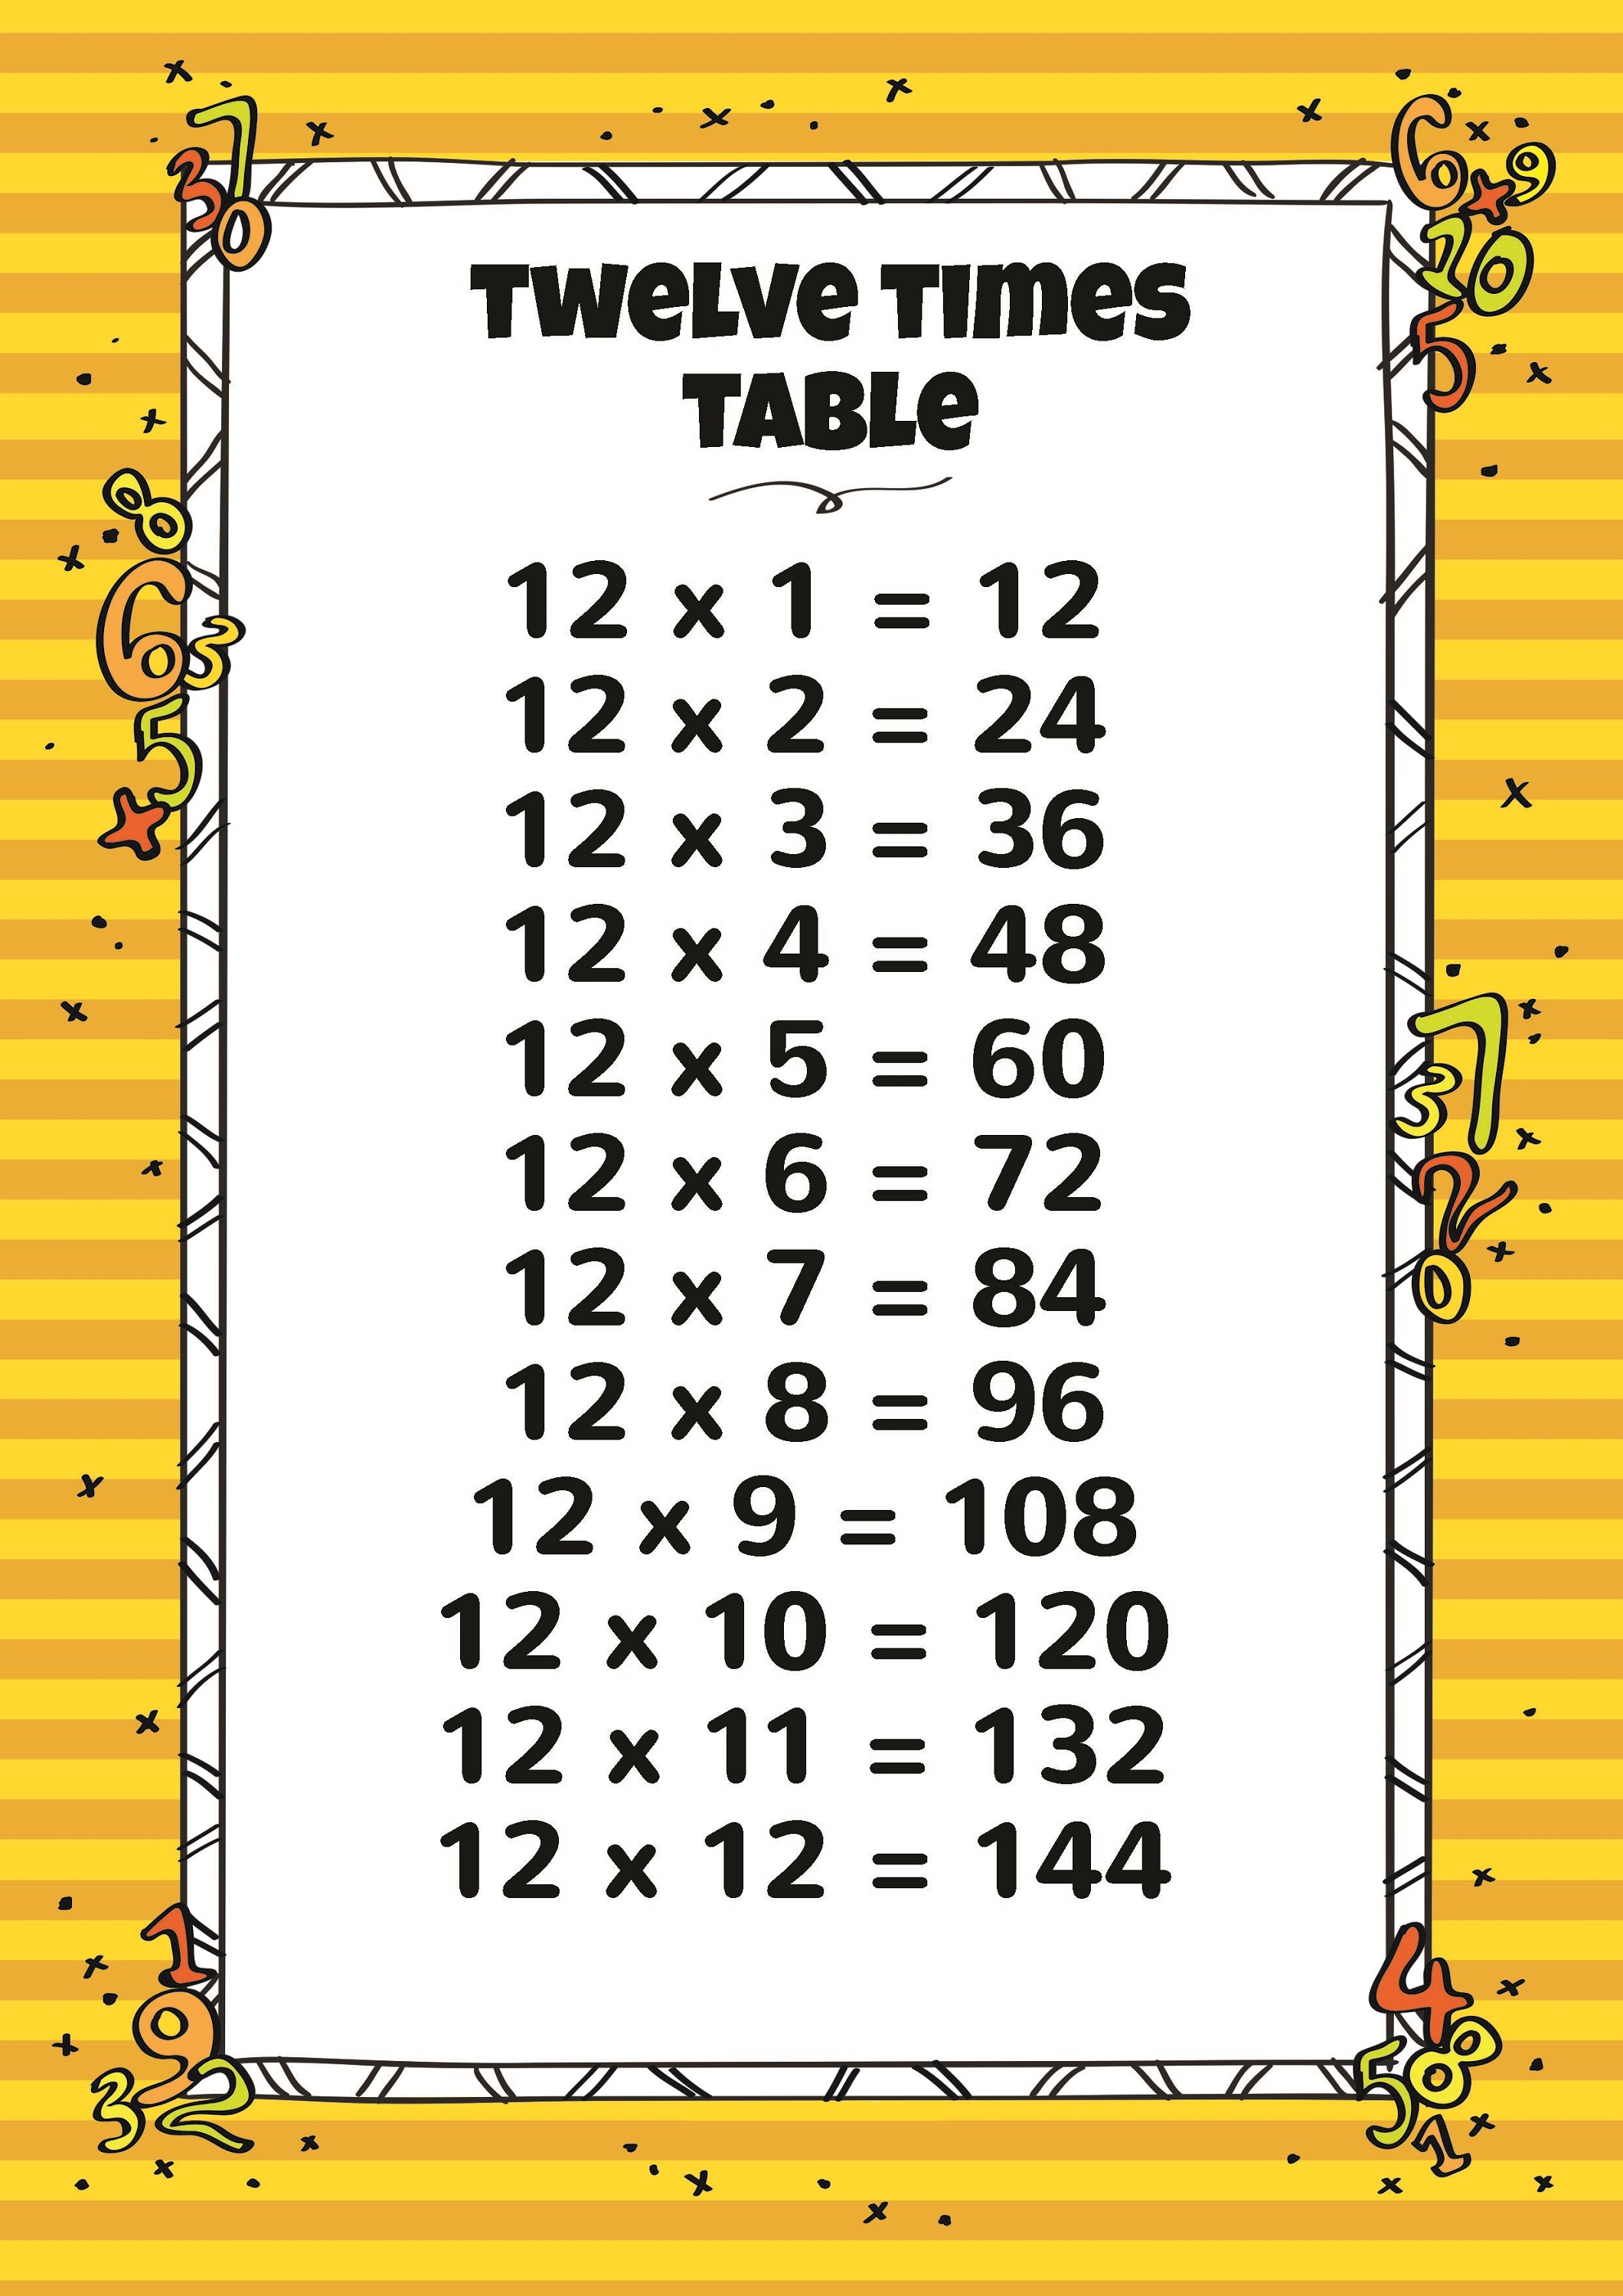 12-table-up-to-20-sopeco